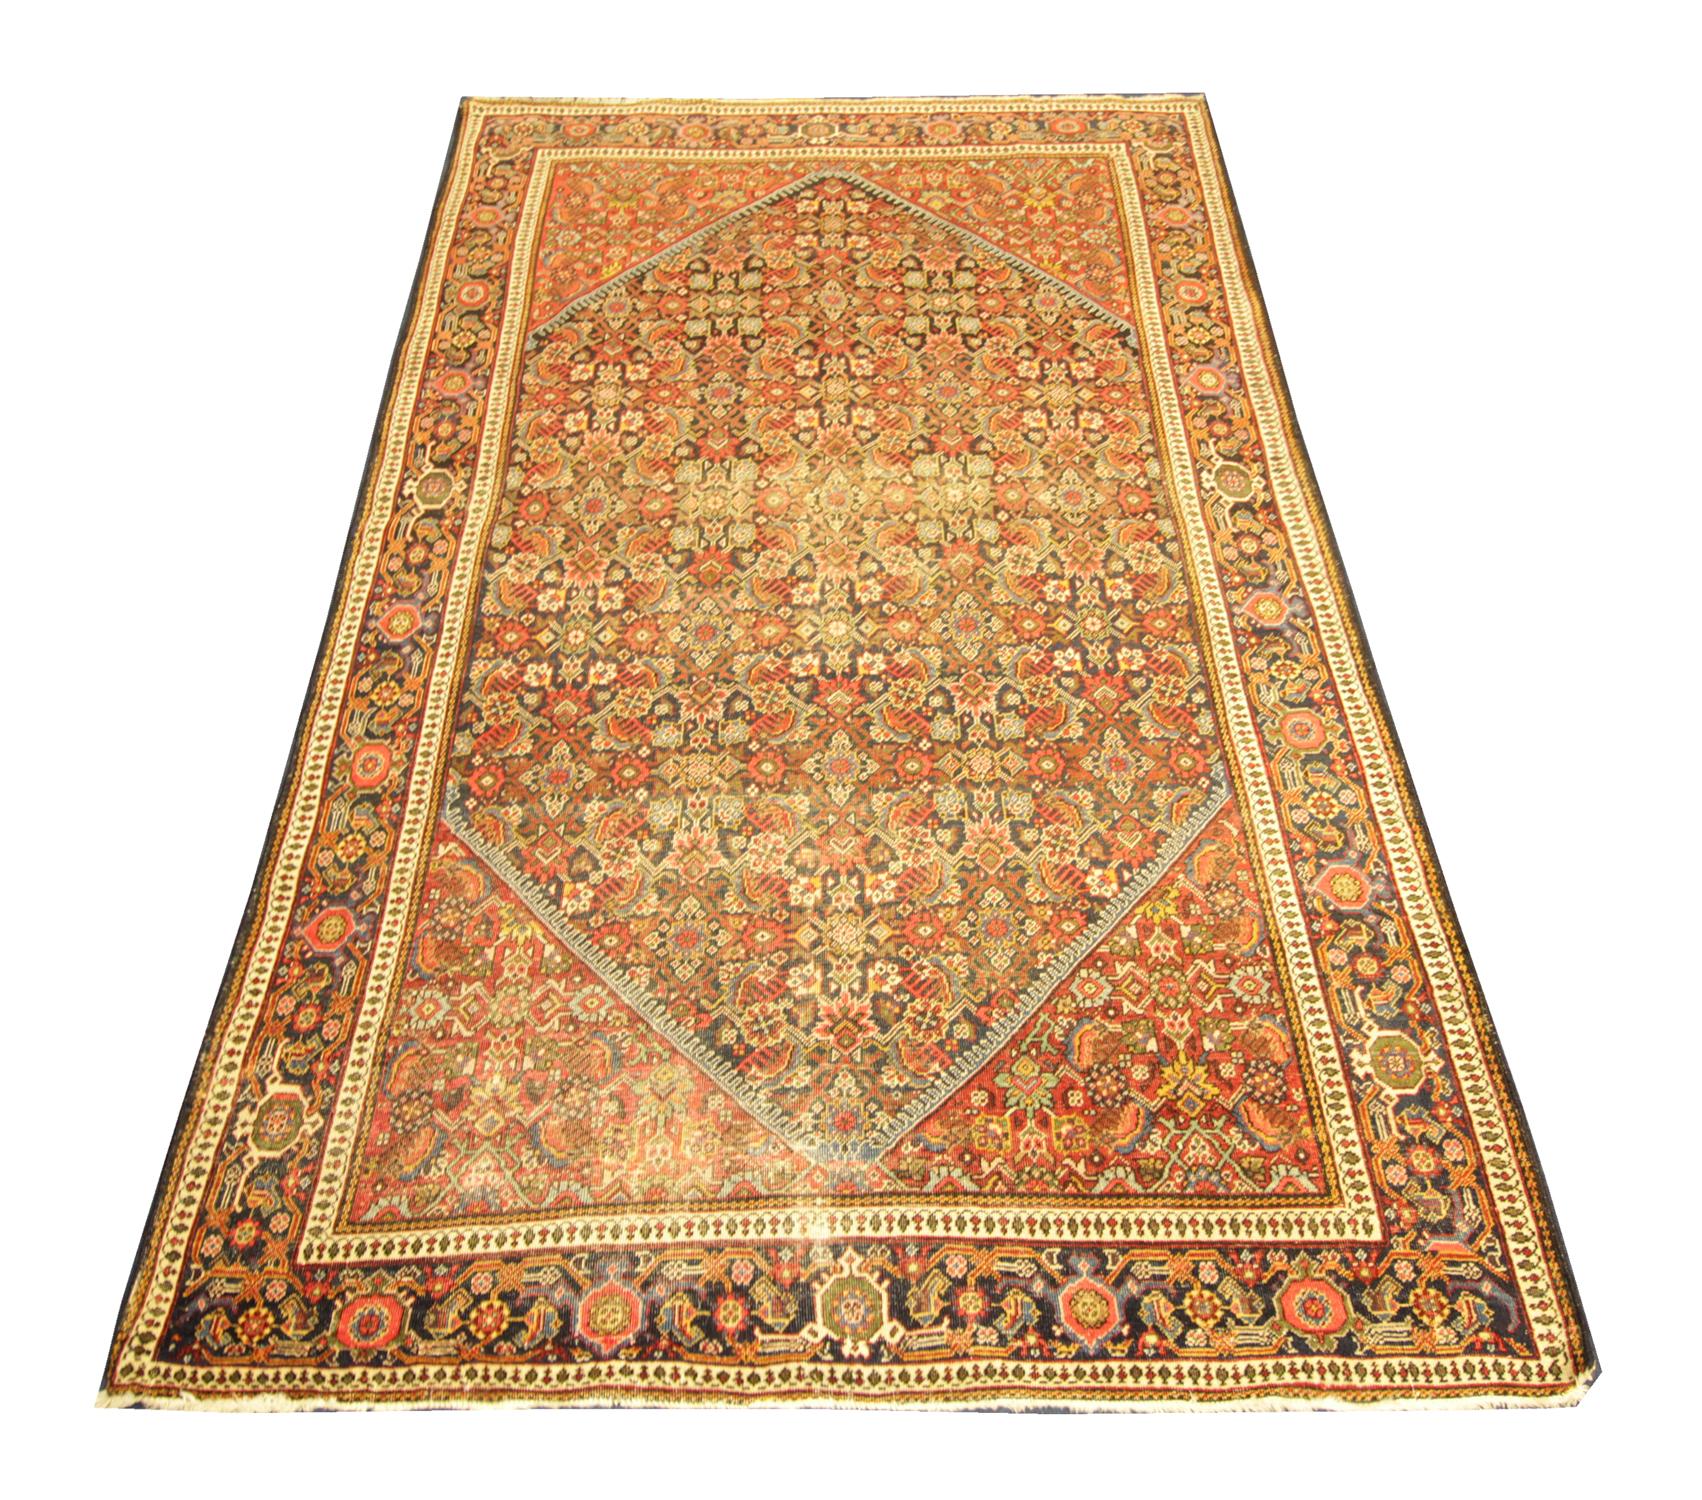 This luxurious square rug was woven by hand in Azerbaijan and featured an all-over pattern woven on a brown background with red, orange, and cream accents. Delicately decorated with intricate patterns. The elegant design and sophisticated colour